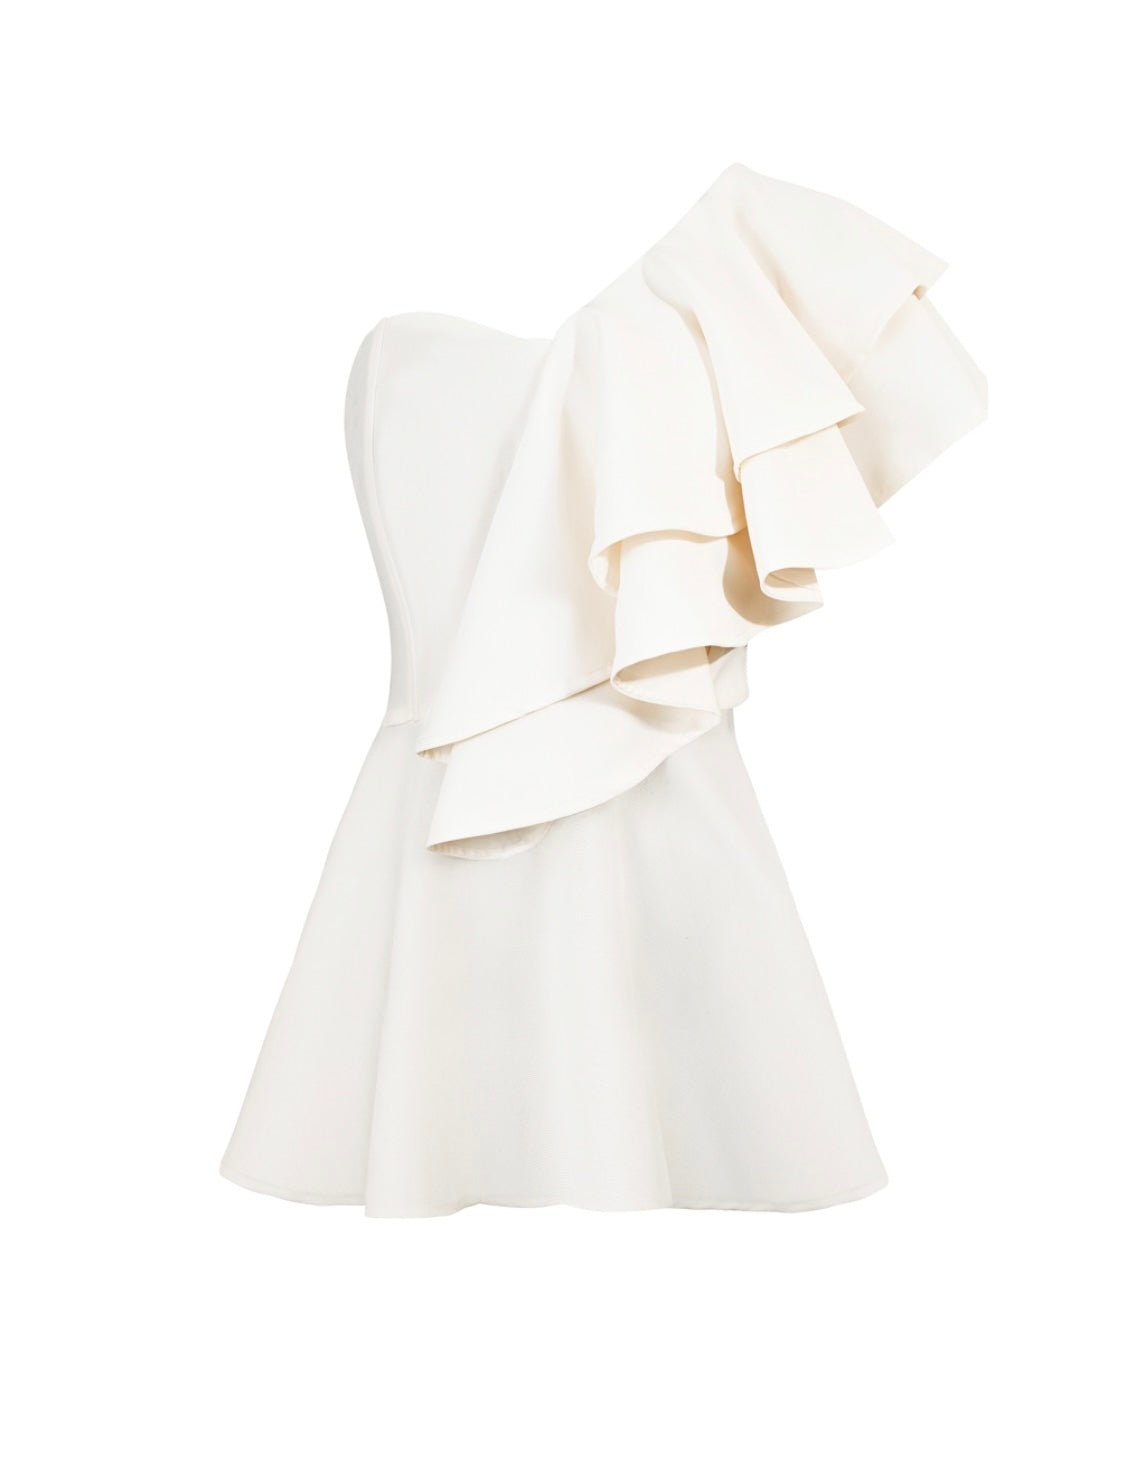 Cream one-shoulder ruffle peplum top. This sophisticated top showcases a single shoulder design with a charming ruffle detail and a flattering peplum silhouette. The cream color adds a touch of elegance, making it a versatile and stylish choice for various occasions